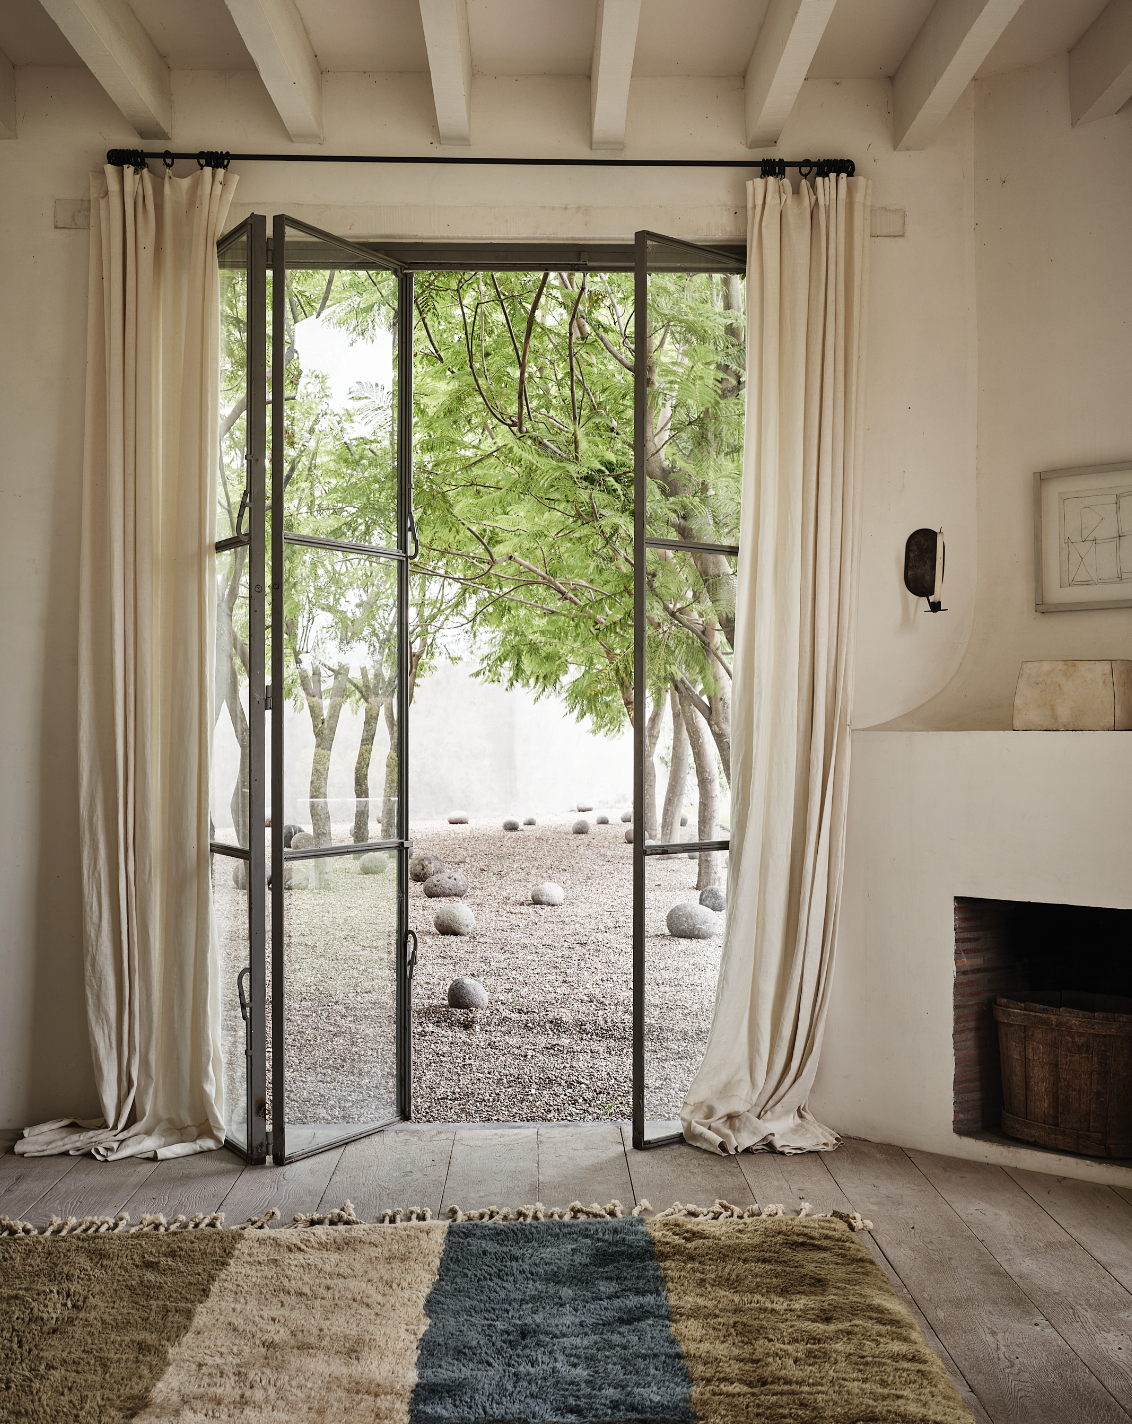 Obscura collection by Colin King for Beni Rugs